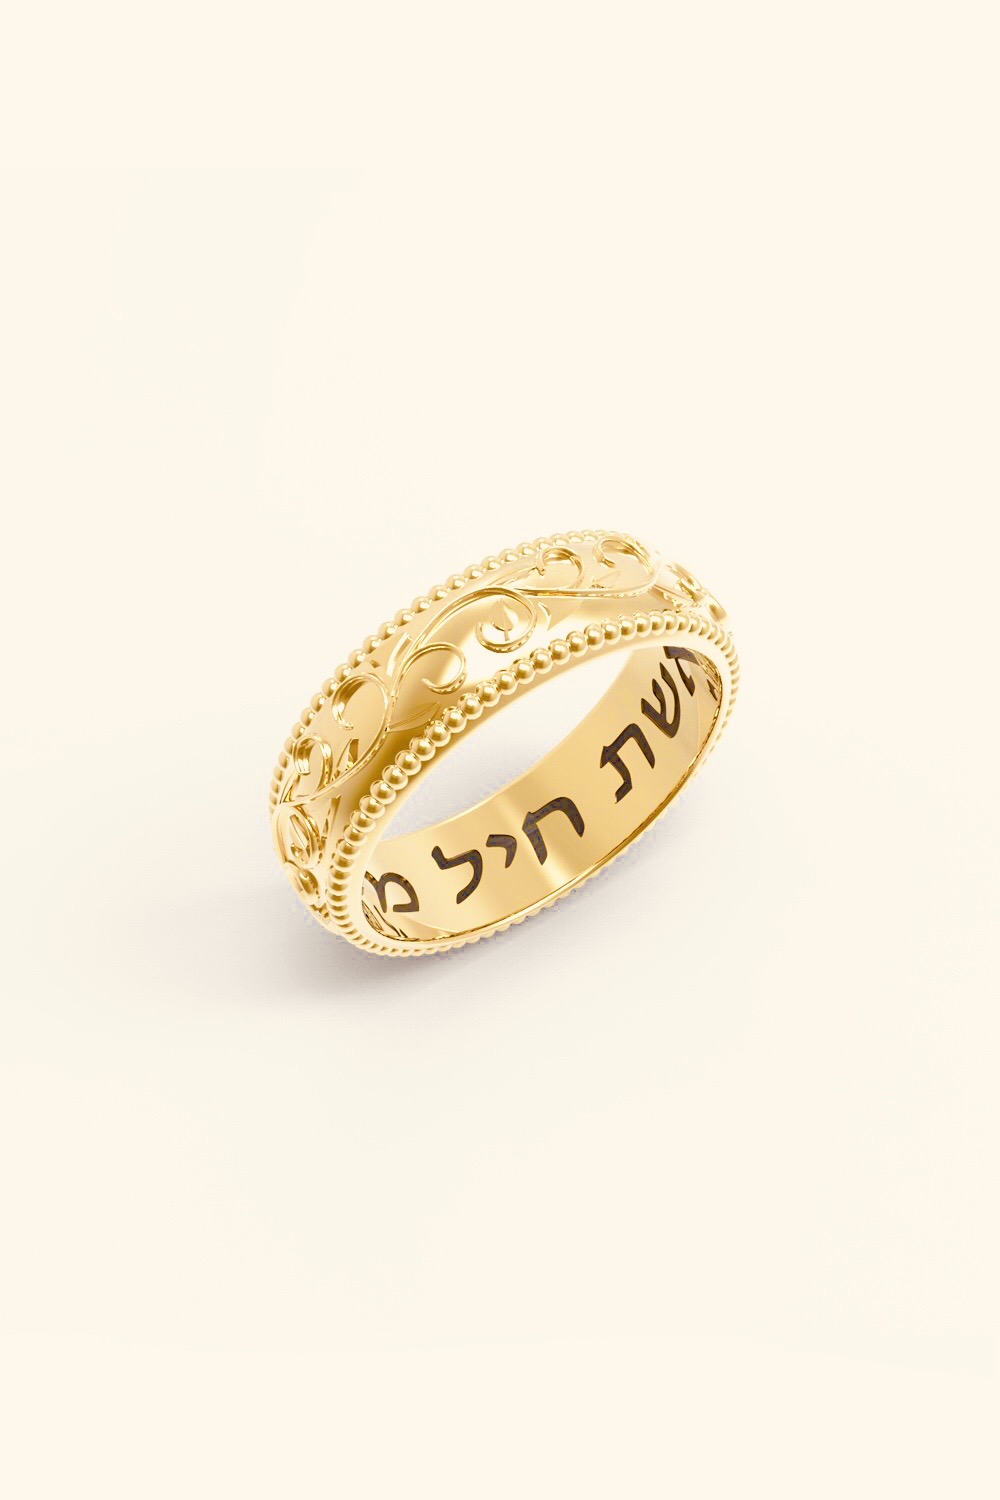 Sterling Silver Wide English / Hebrew Customizable Ring with 14K Gold  Stripes, Jewish Jewelry | Judaica WebStore